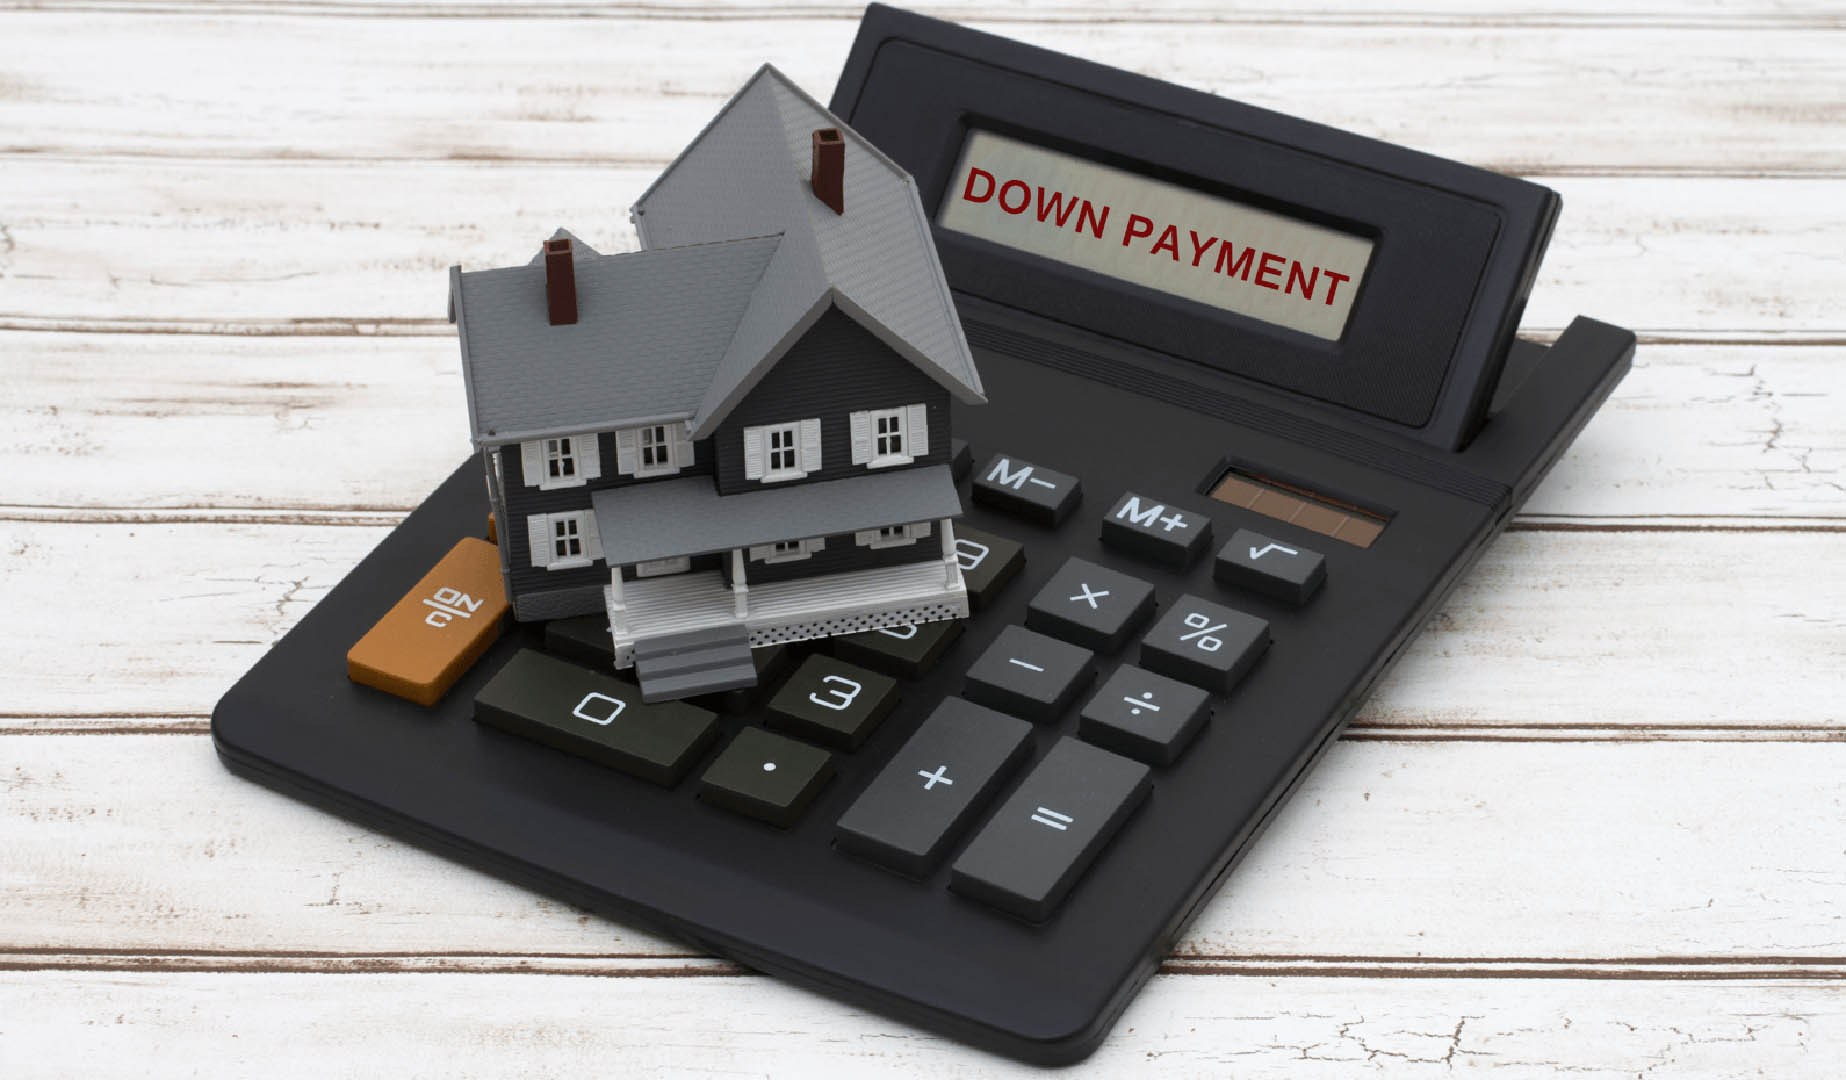 Is 20 Percent the Best Amount for a Down Payment? Calculator Image